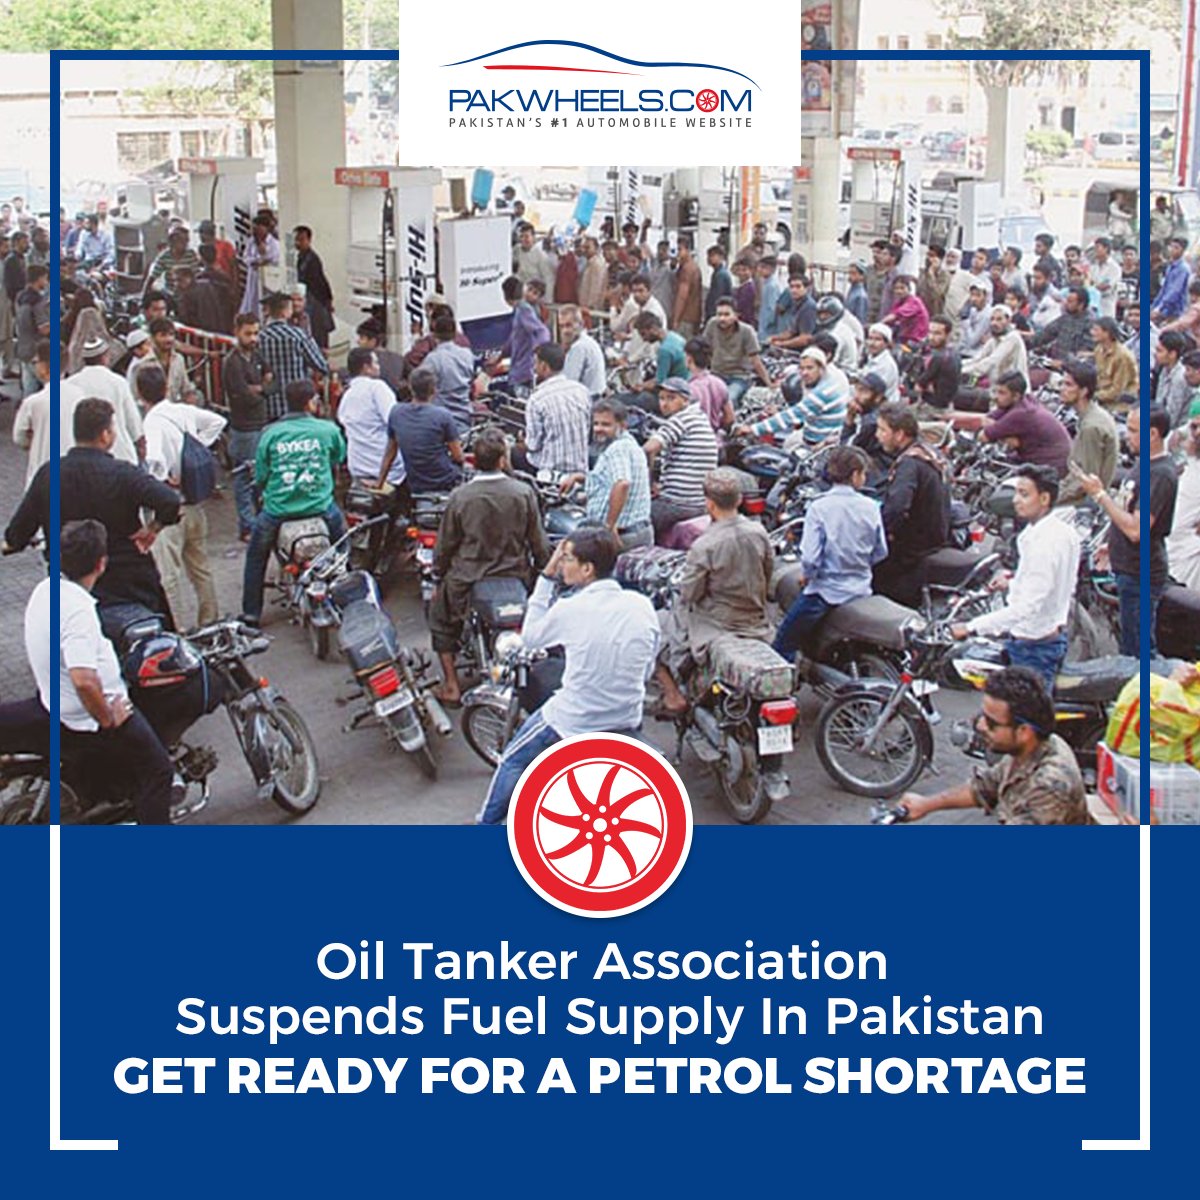 The strike would continue until the government meets the association's demands, even if there's a fuel crisis in the country.
Click here for details:  ow.ly/QtWt30rLQtw 
#PakWheels #OilShortage